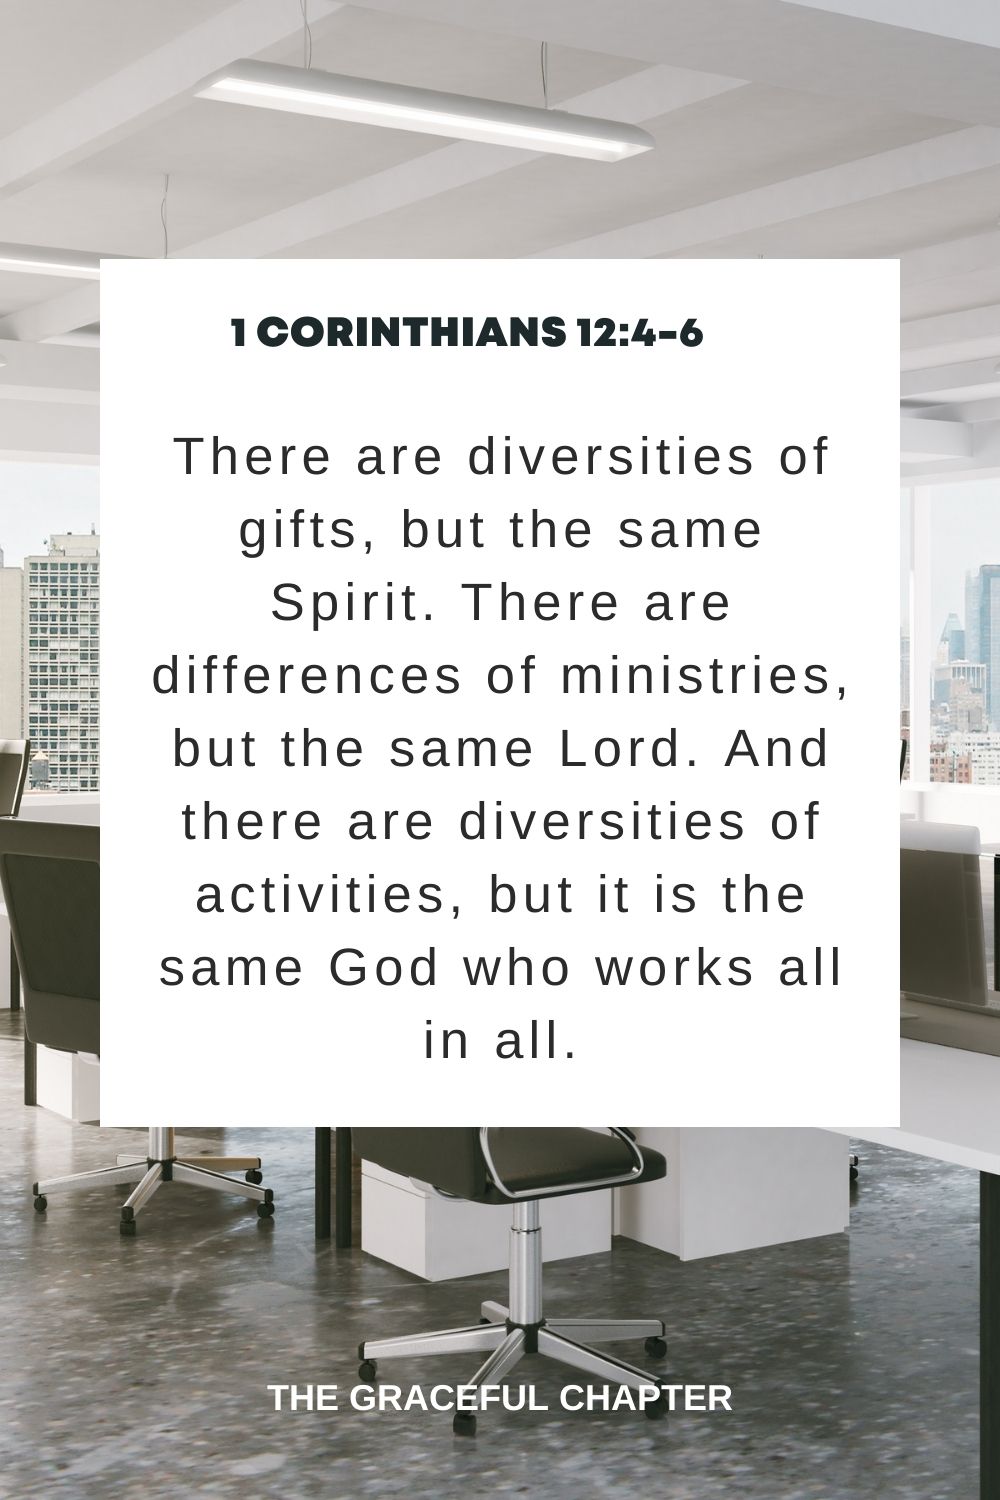 There are diversities of gifts, but the same Spirit. There are differences of ministries, but the same Lord. And there are diversities of activities, but it is the same God who works all in all. 1 Corinthians 12:4-6